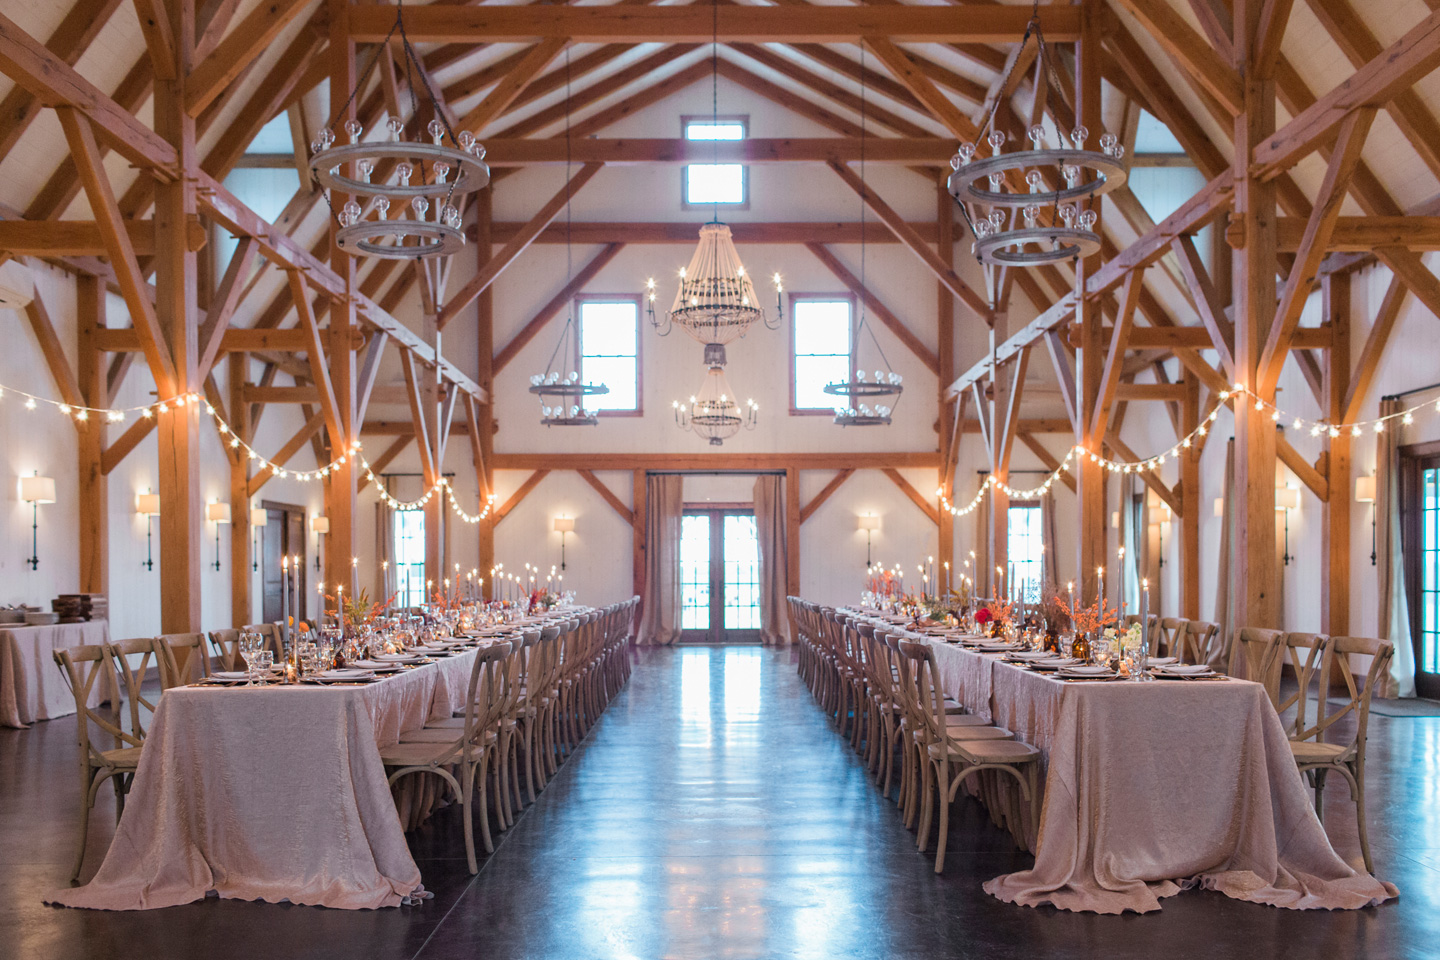 Fall farm to table dinner at Blue bell farms captured by Love Tree Studios.